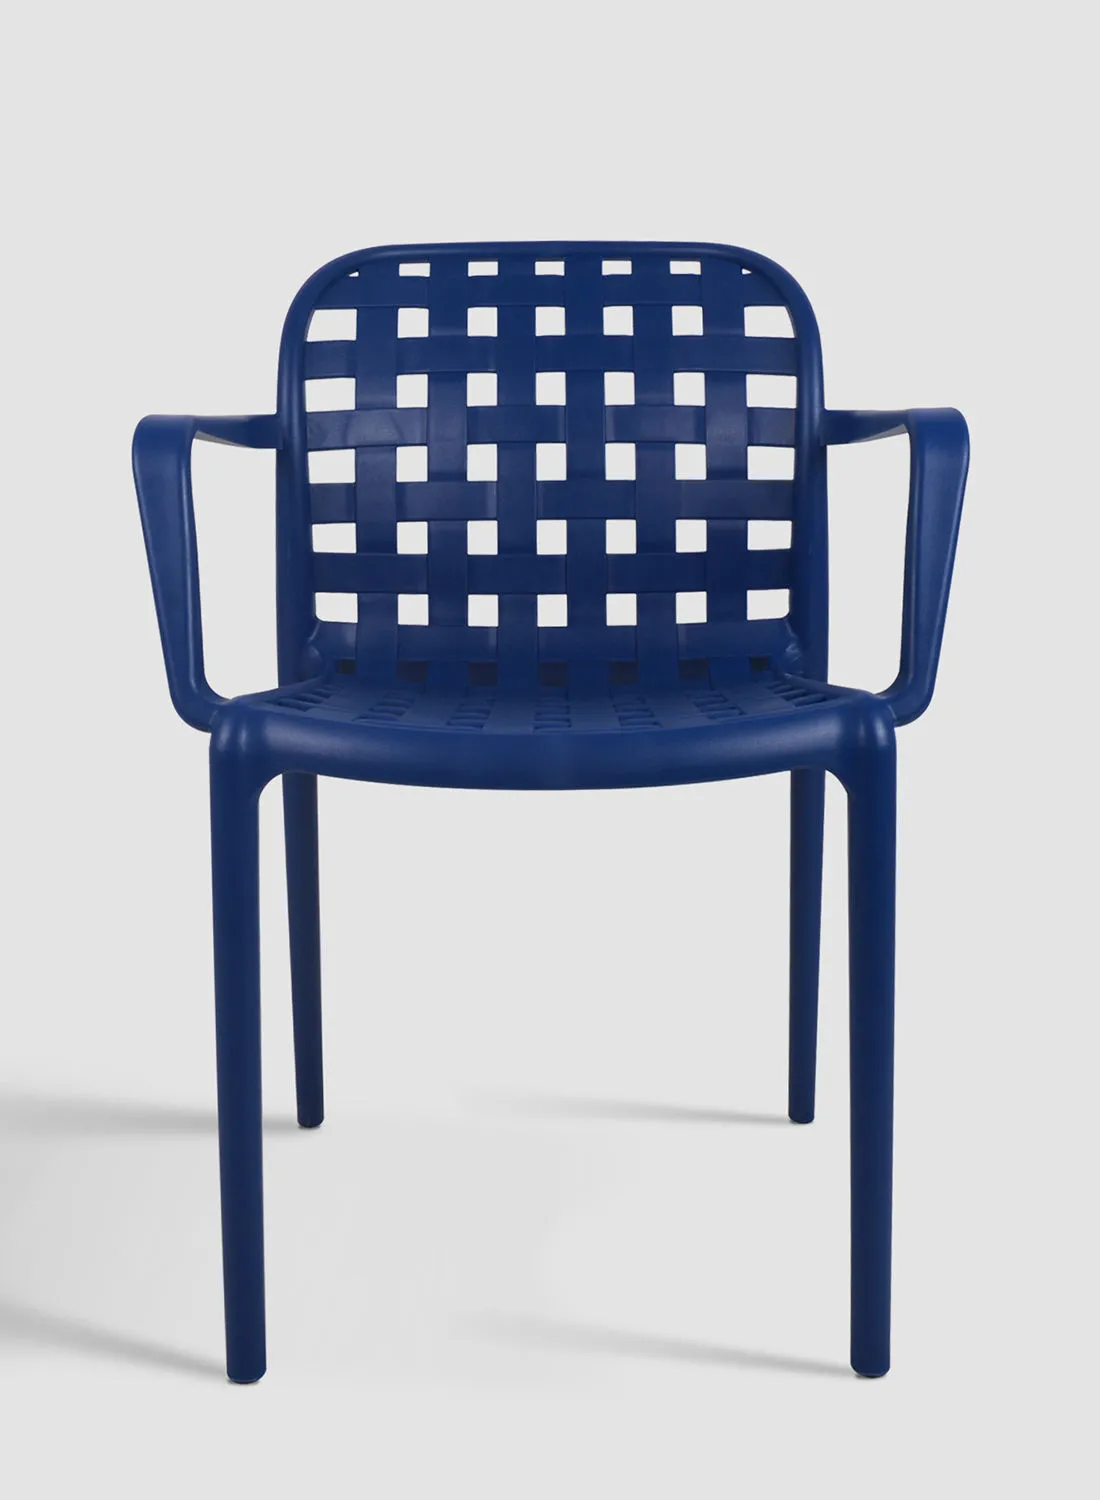 Switch Dining Chair Natural Collection In Navy Blue Plastic Size 57 X 58 X 83